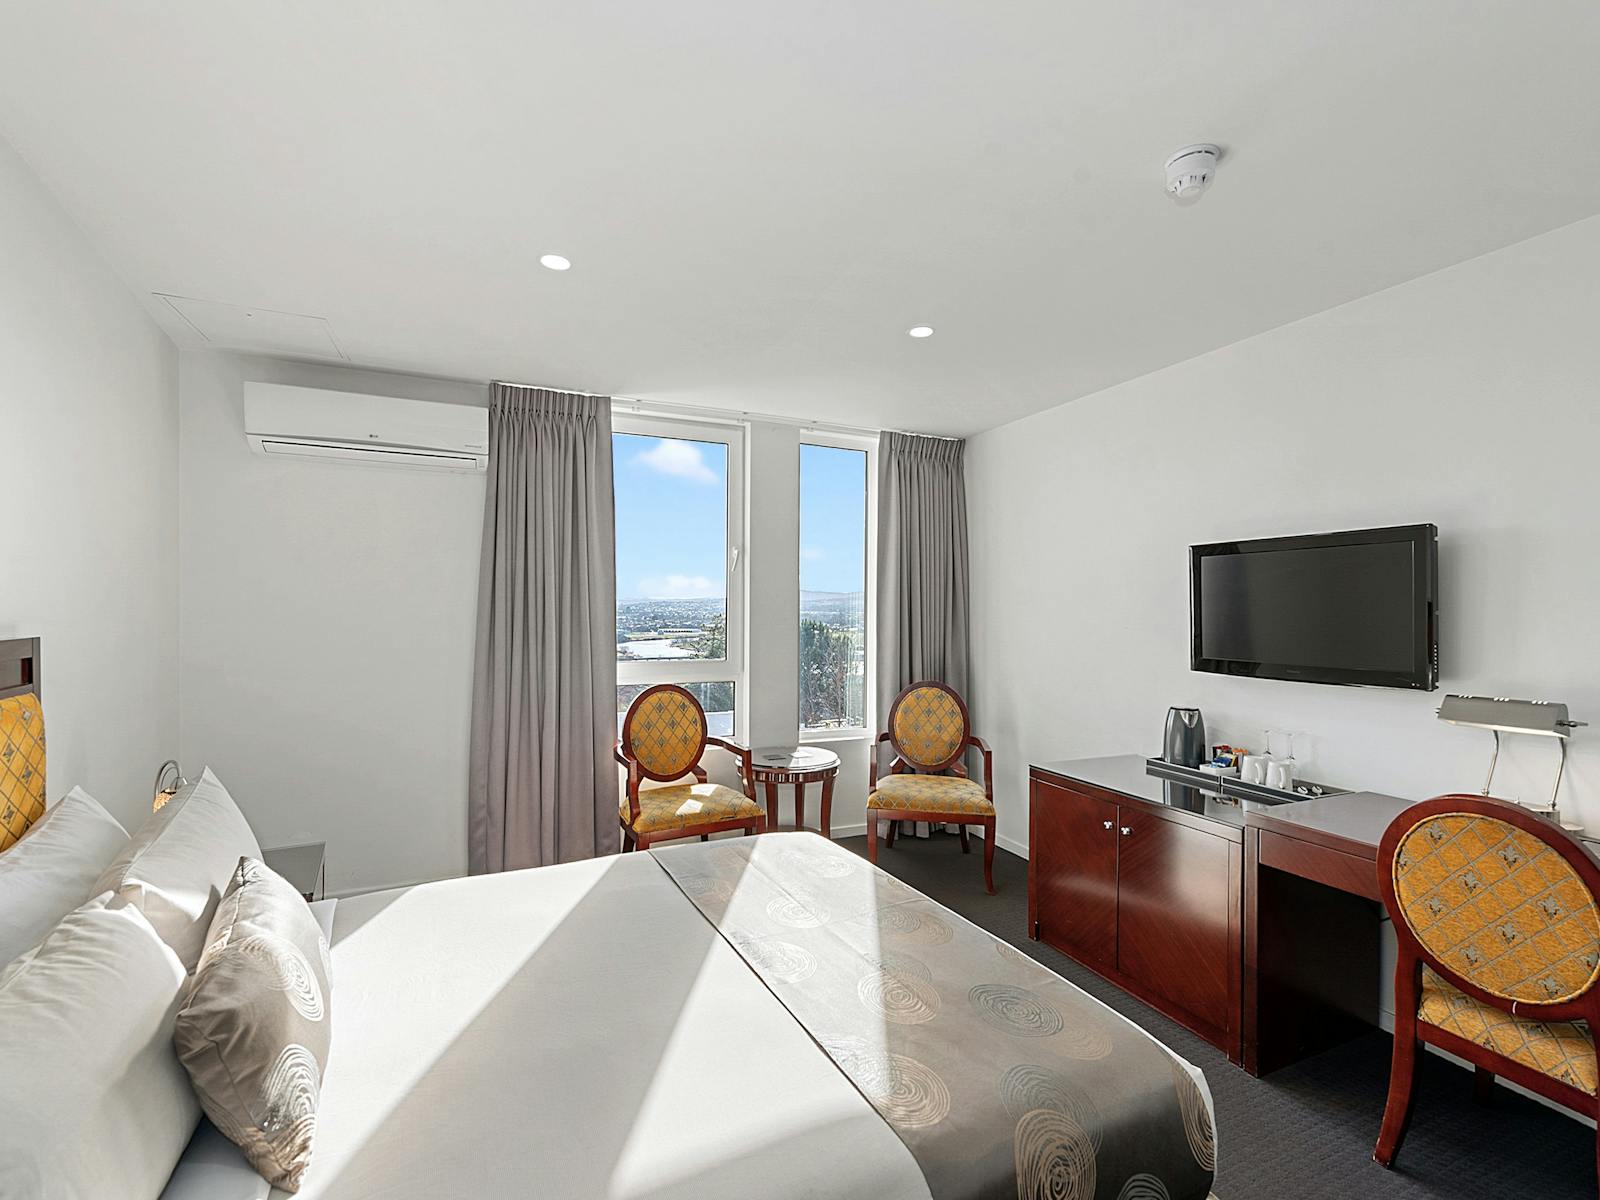 Queen Room with a queen-size bed and views overlooking the city